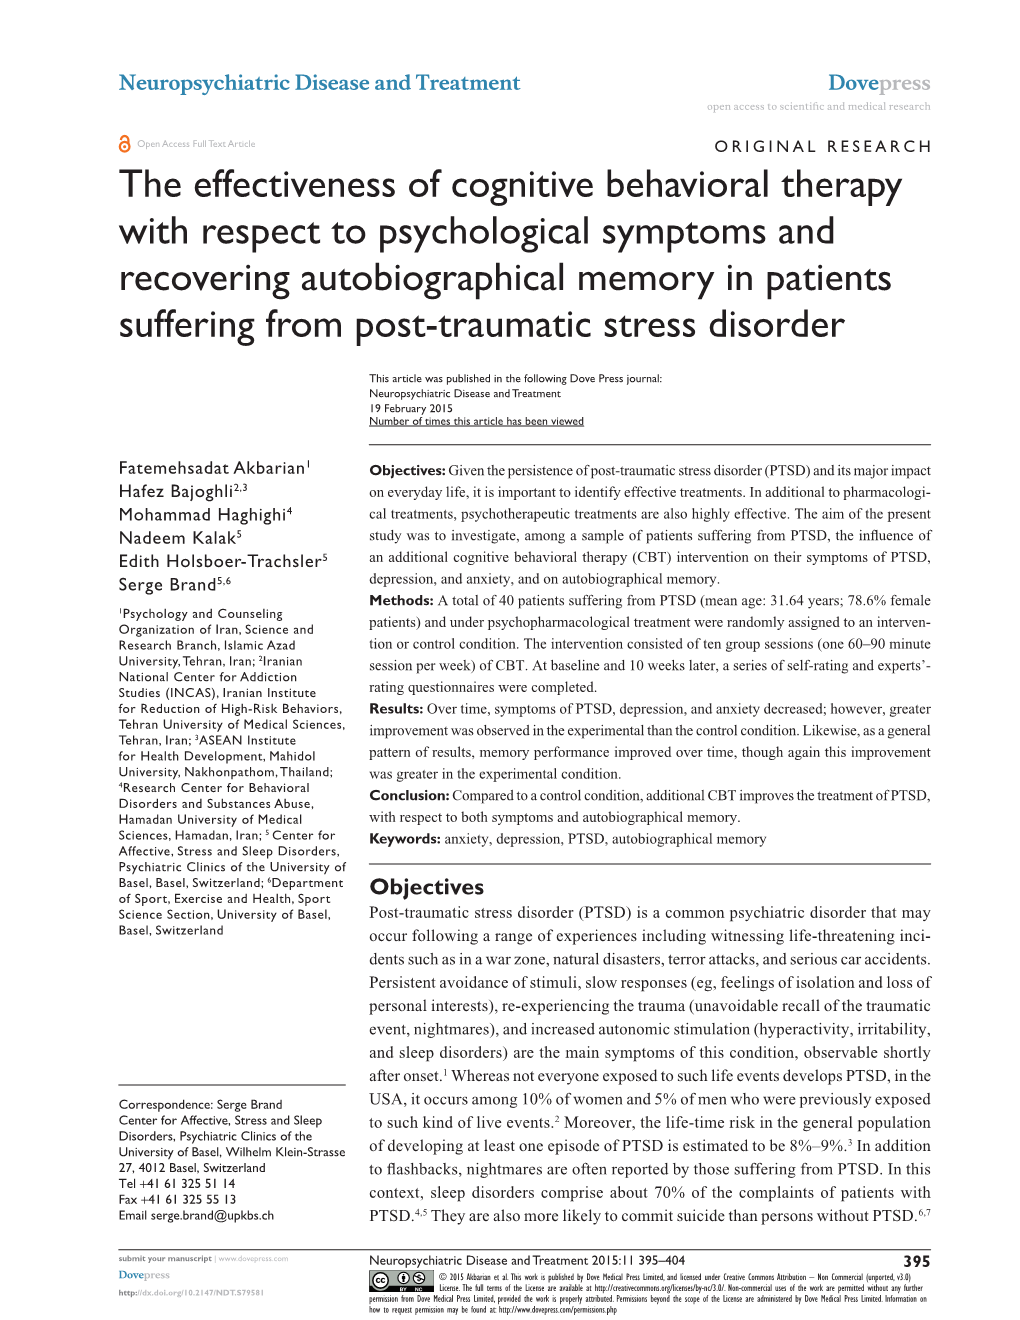 The Effectiveness of Cognitive Behavioral Therapy